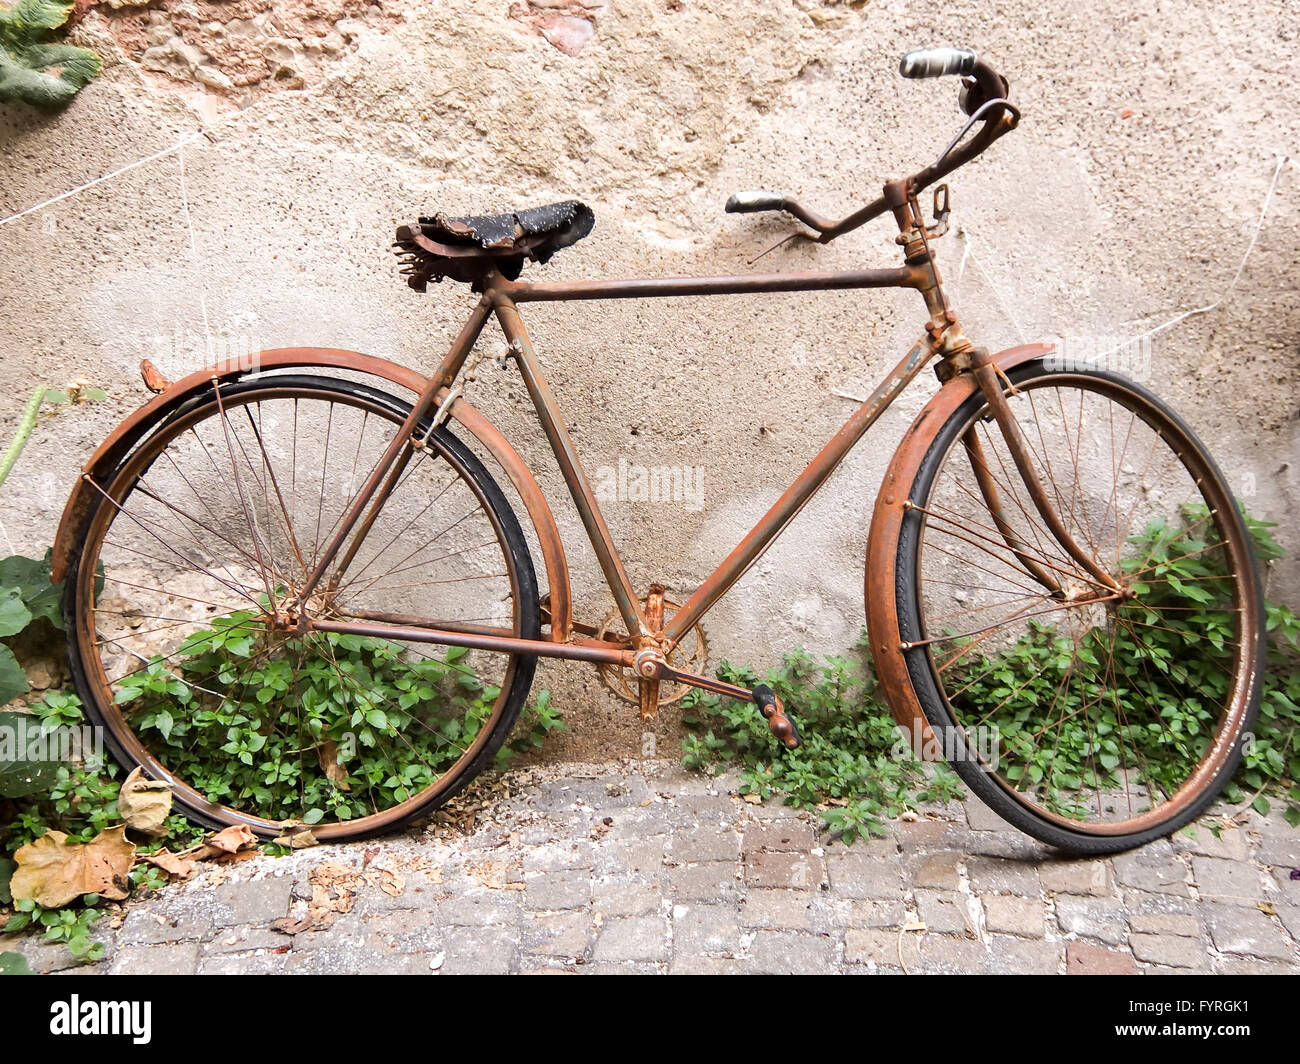 Old rusty vintage bicycle Stock Photo